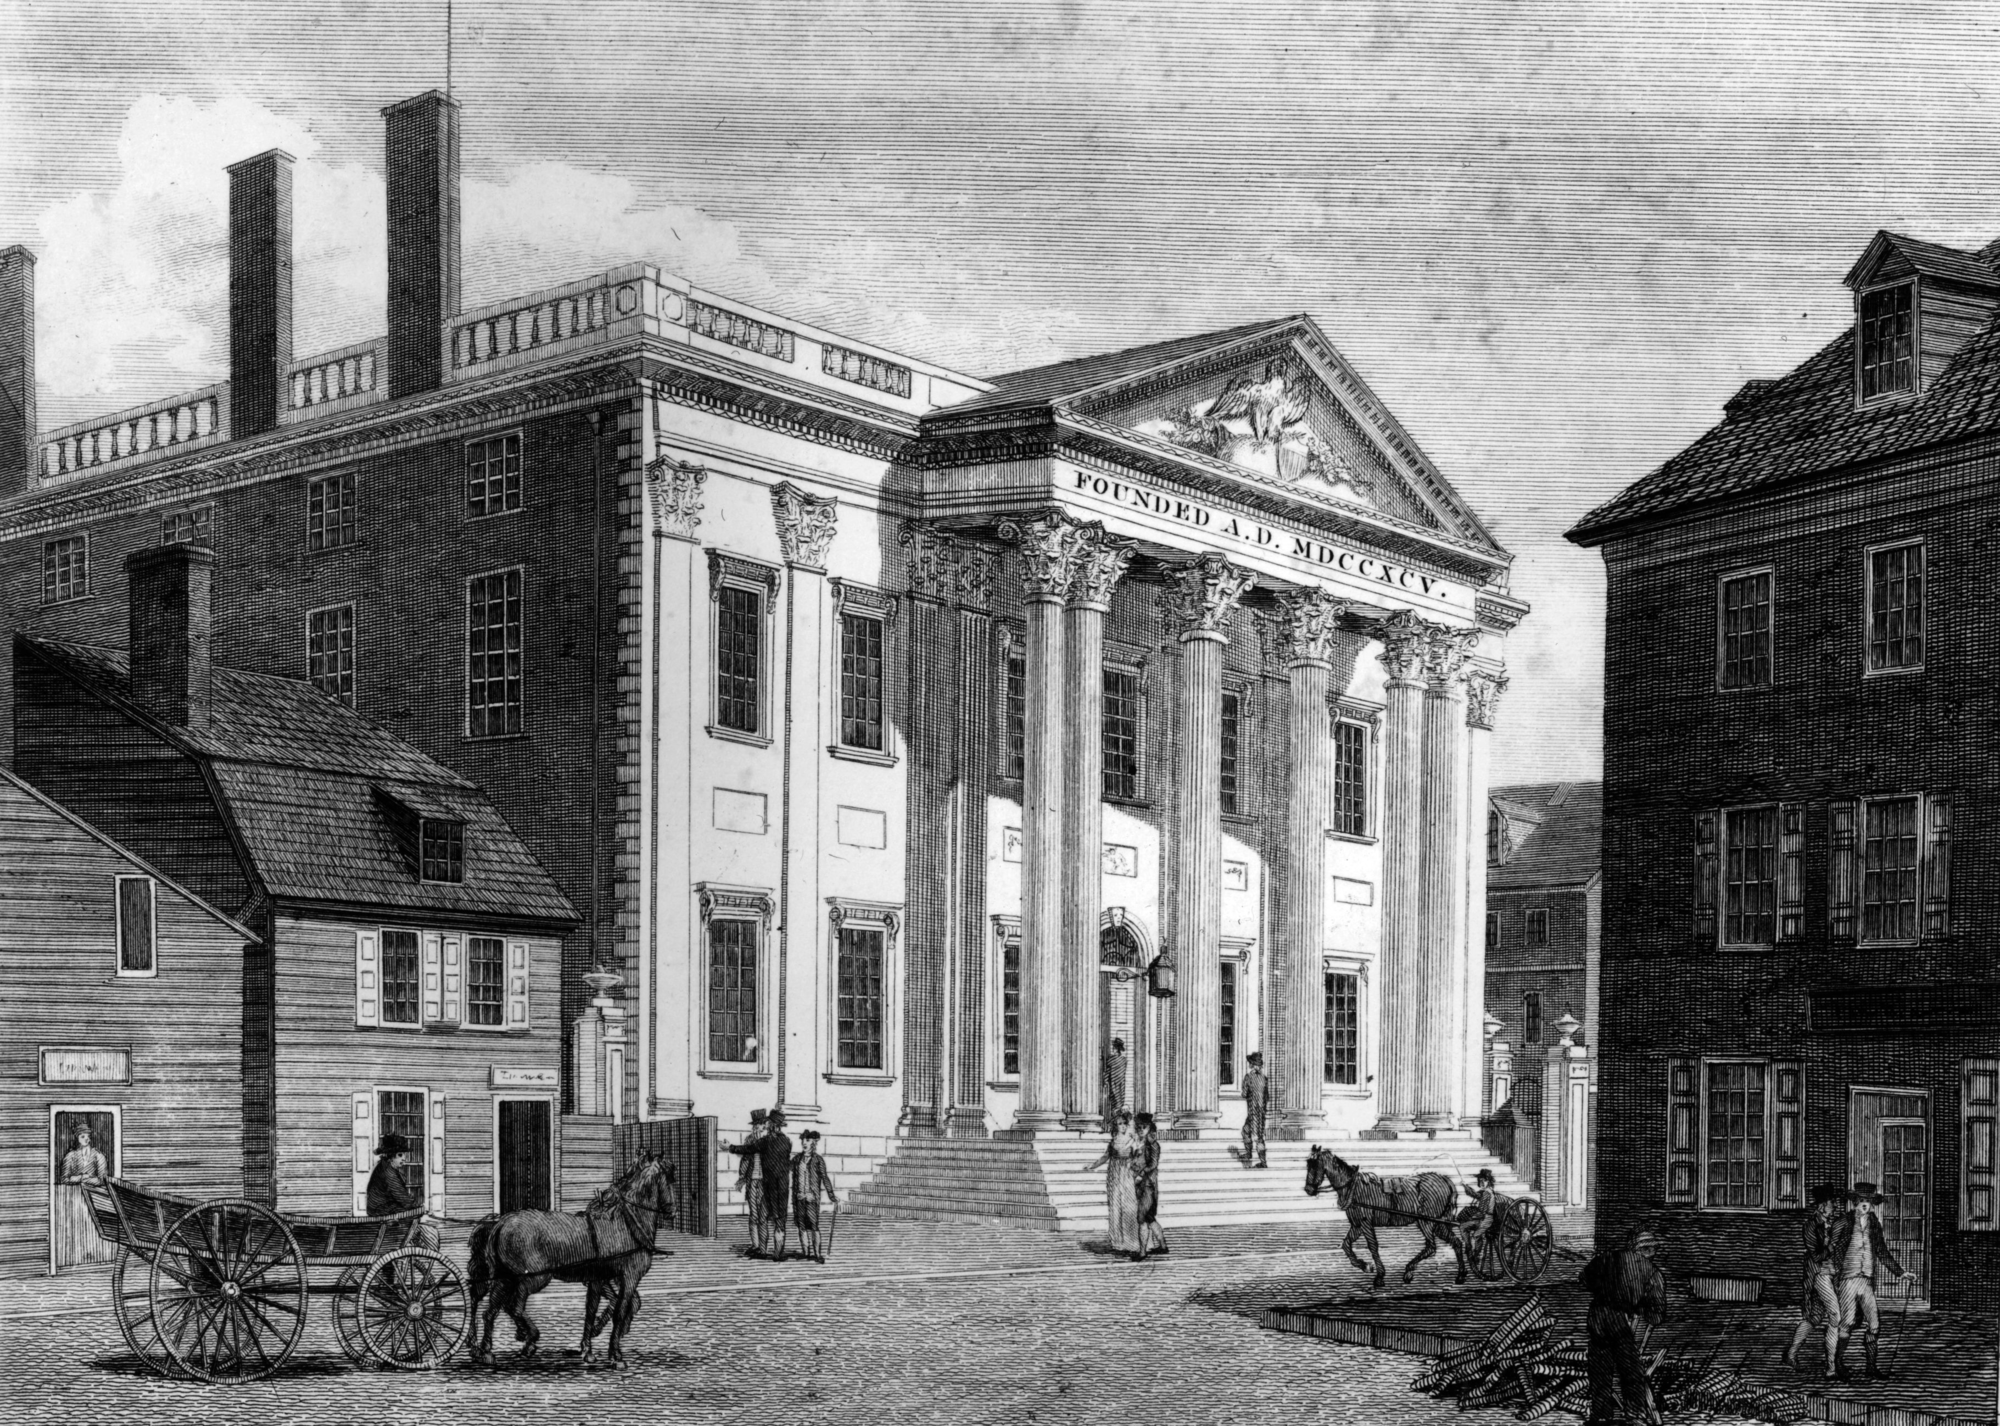 Illustrated image of the front facade of the Bank of North America in 1781 - MPI // Getty Images